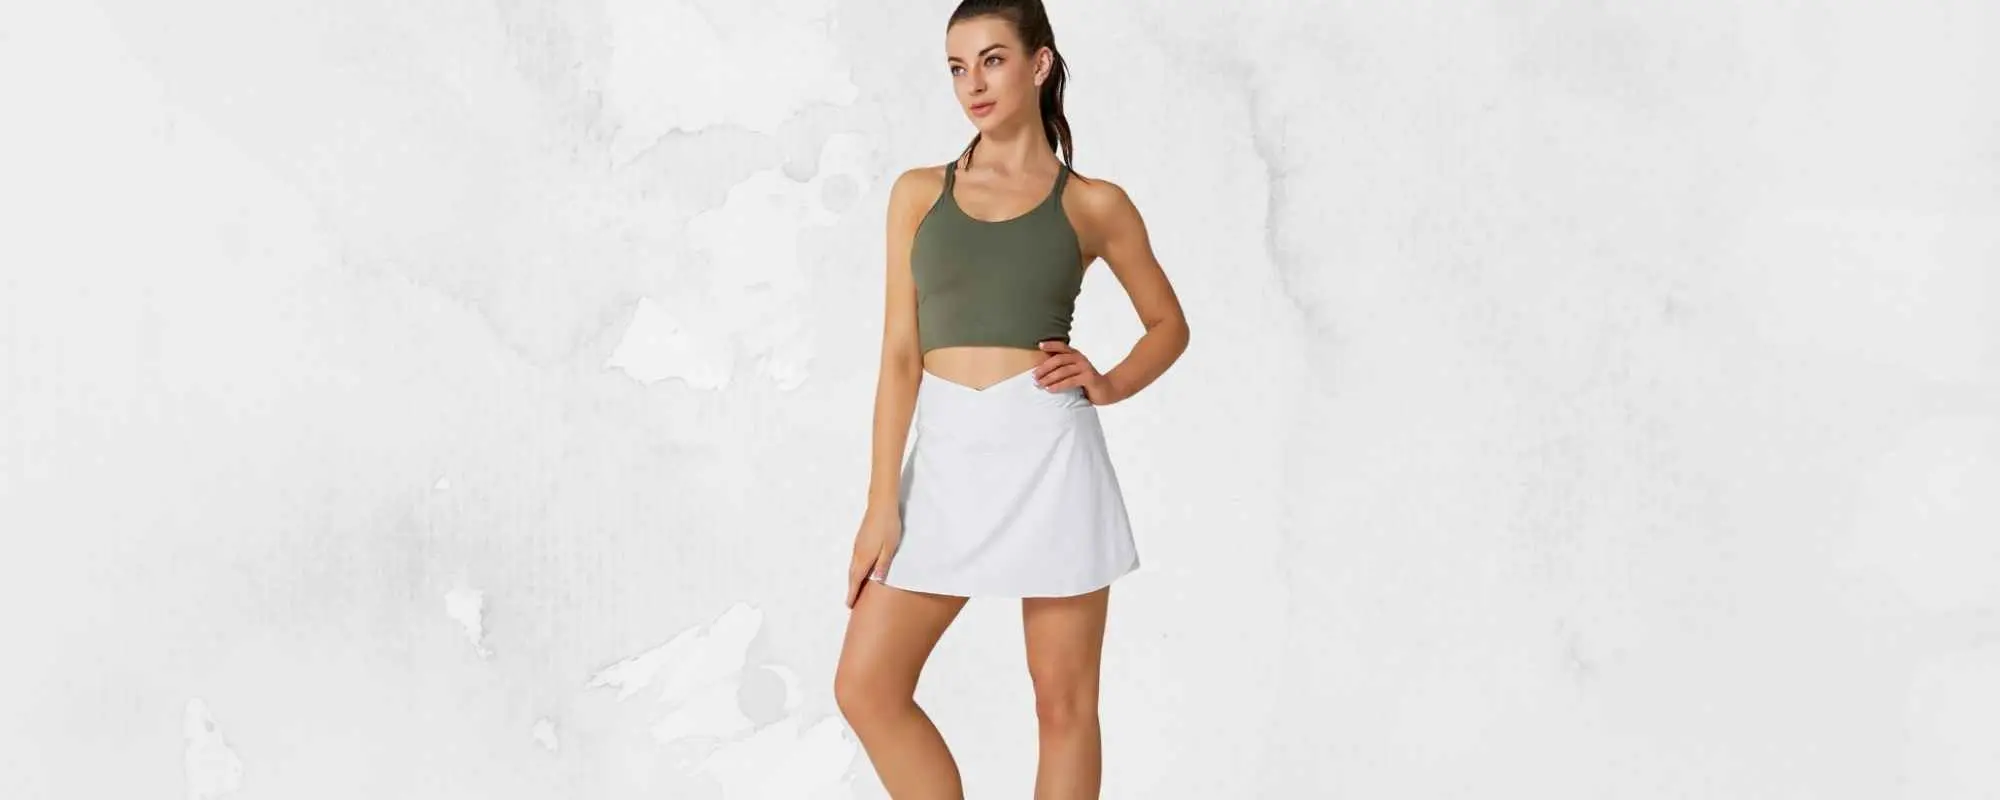 Halara Clothing Review: Is It Worth It? | ClothedUp